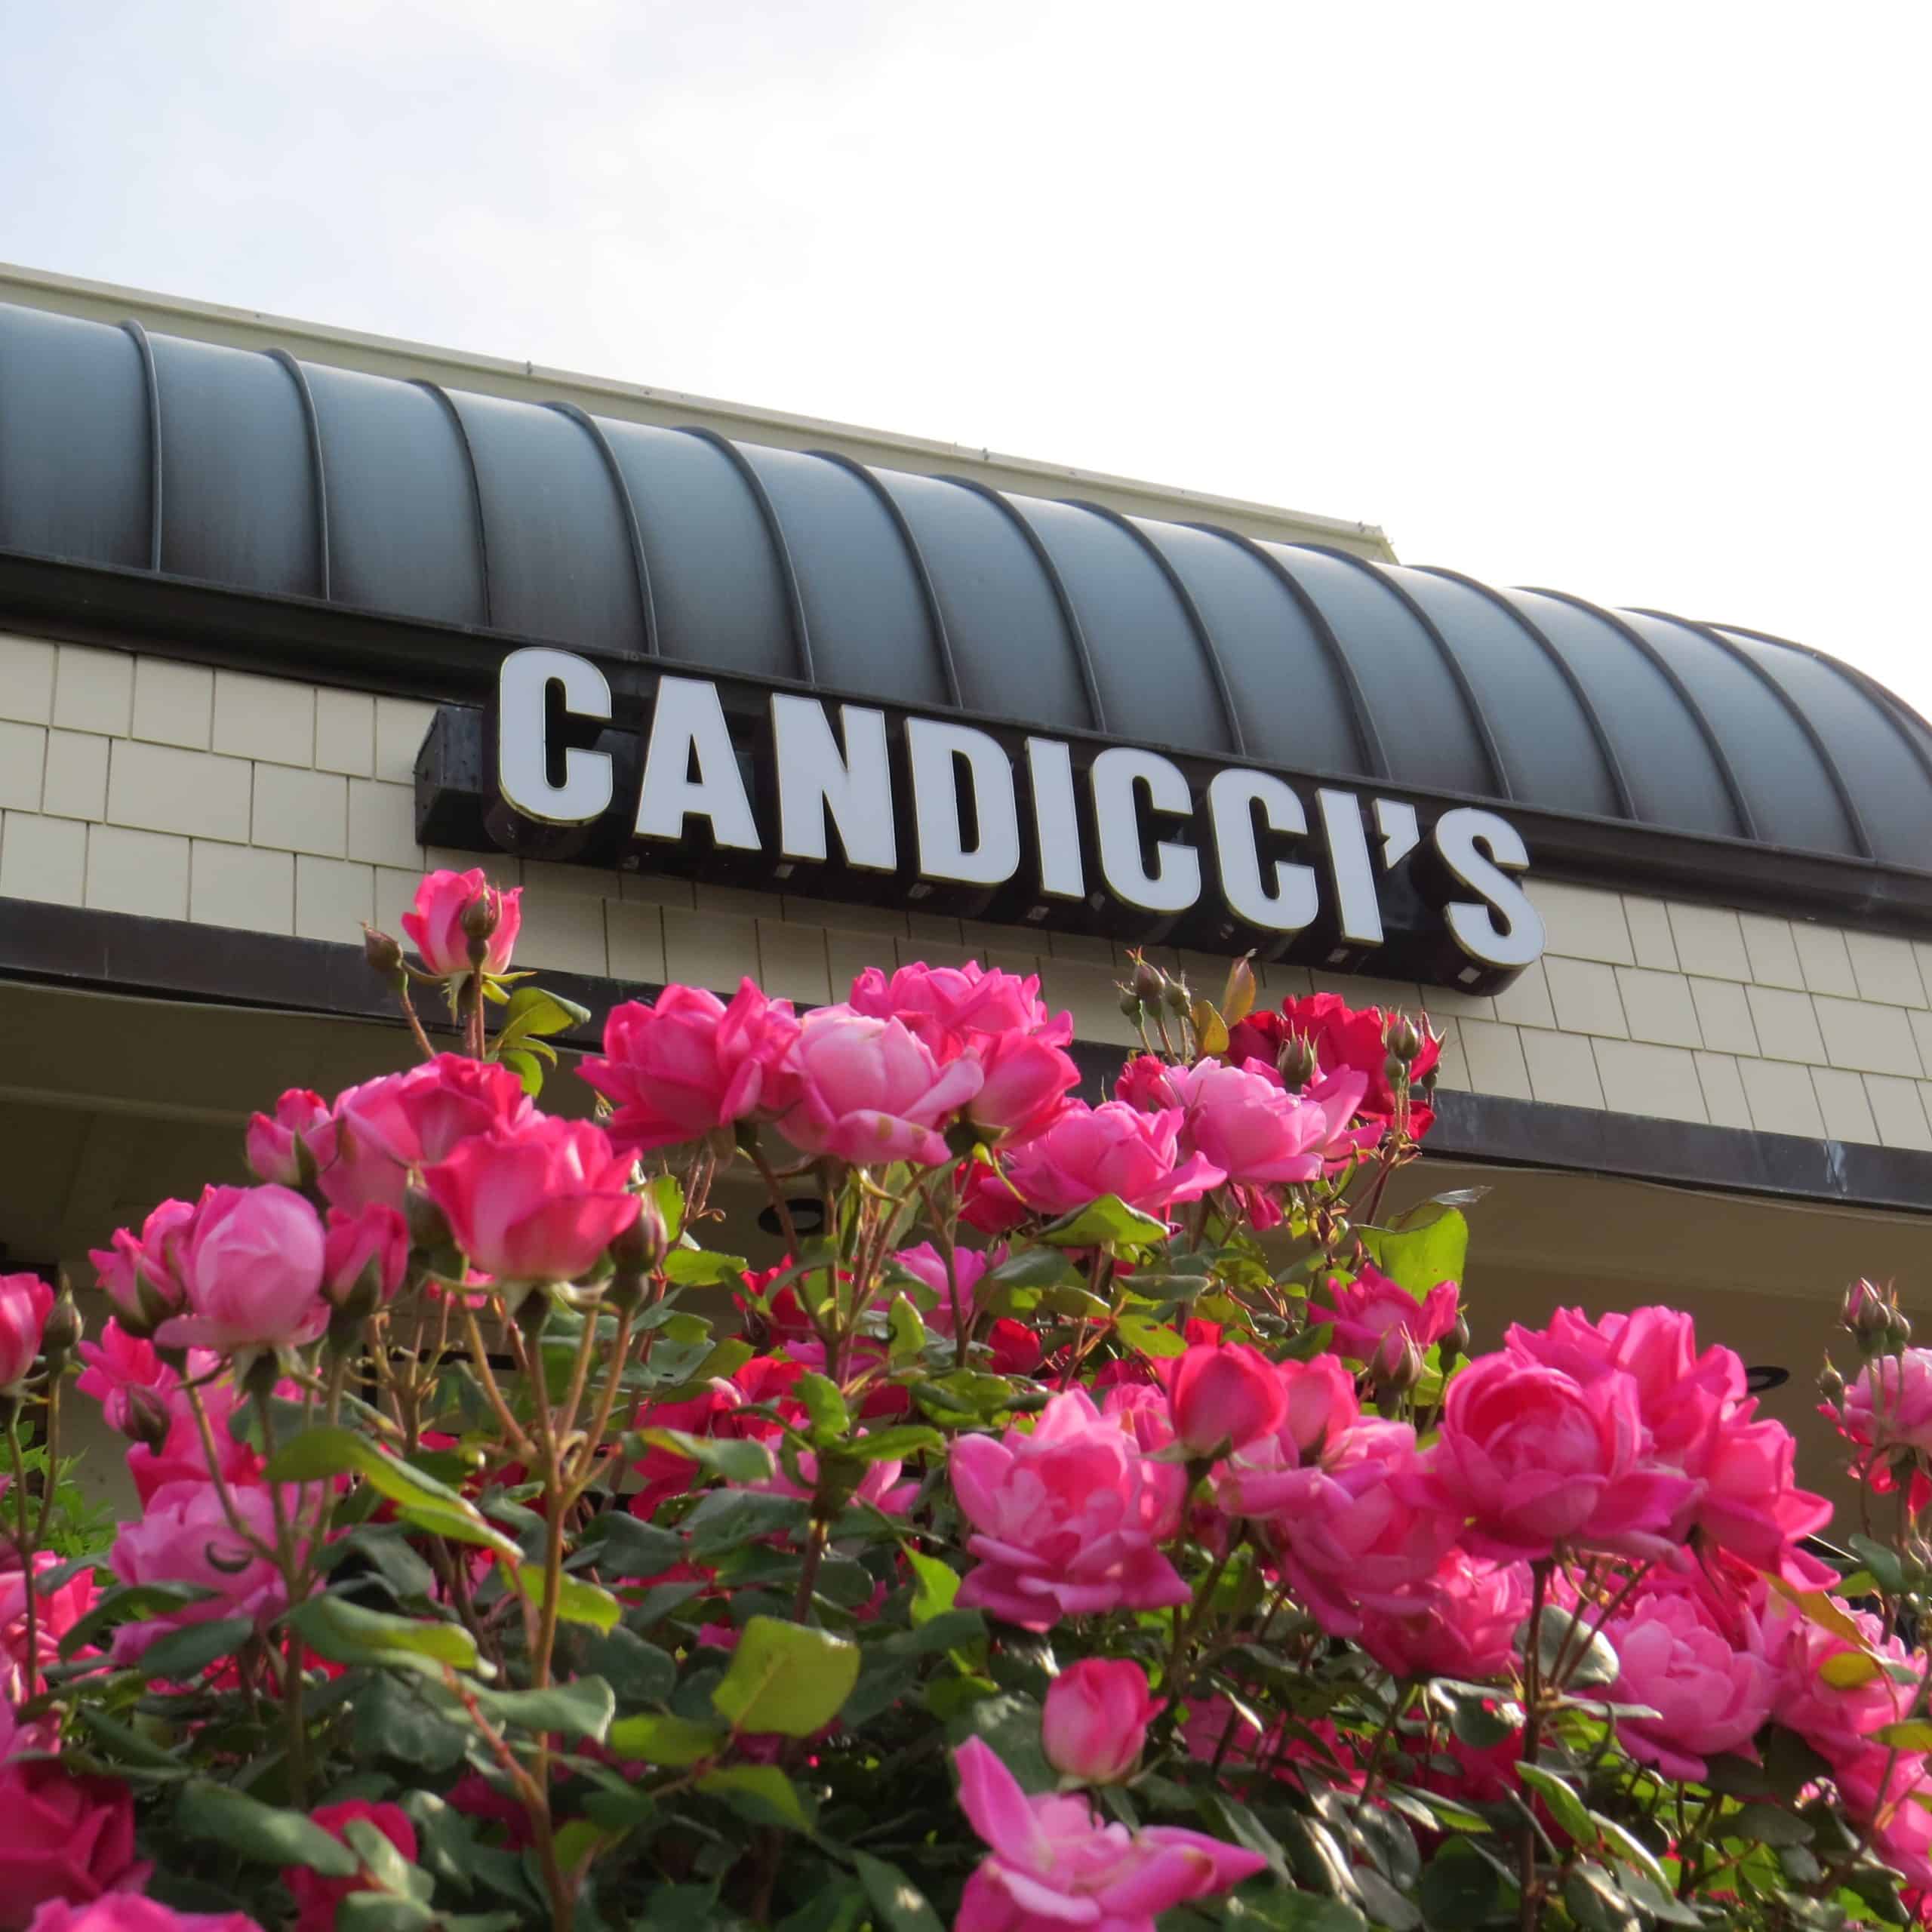 Candicci's Restaurant launches new website with online ordering